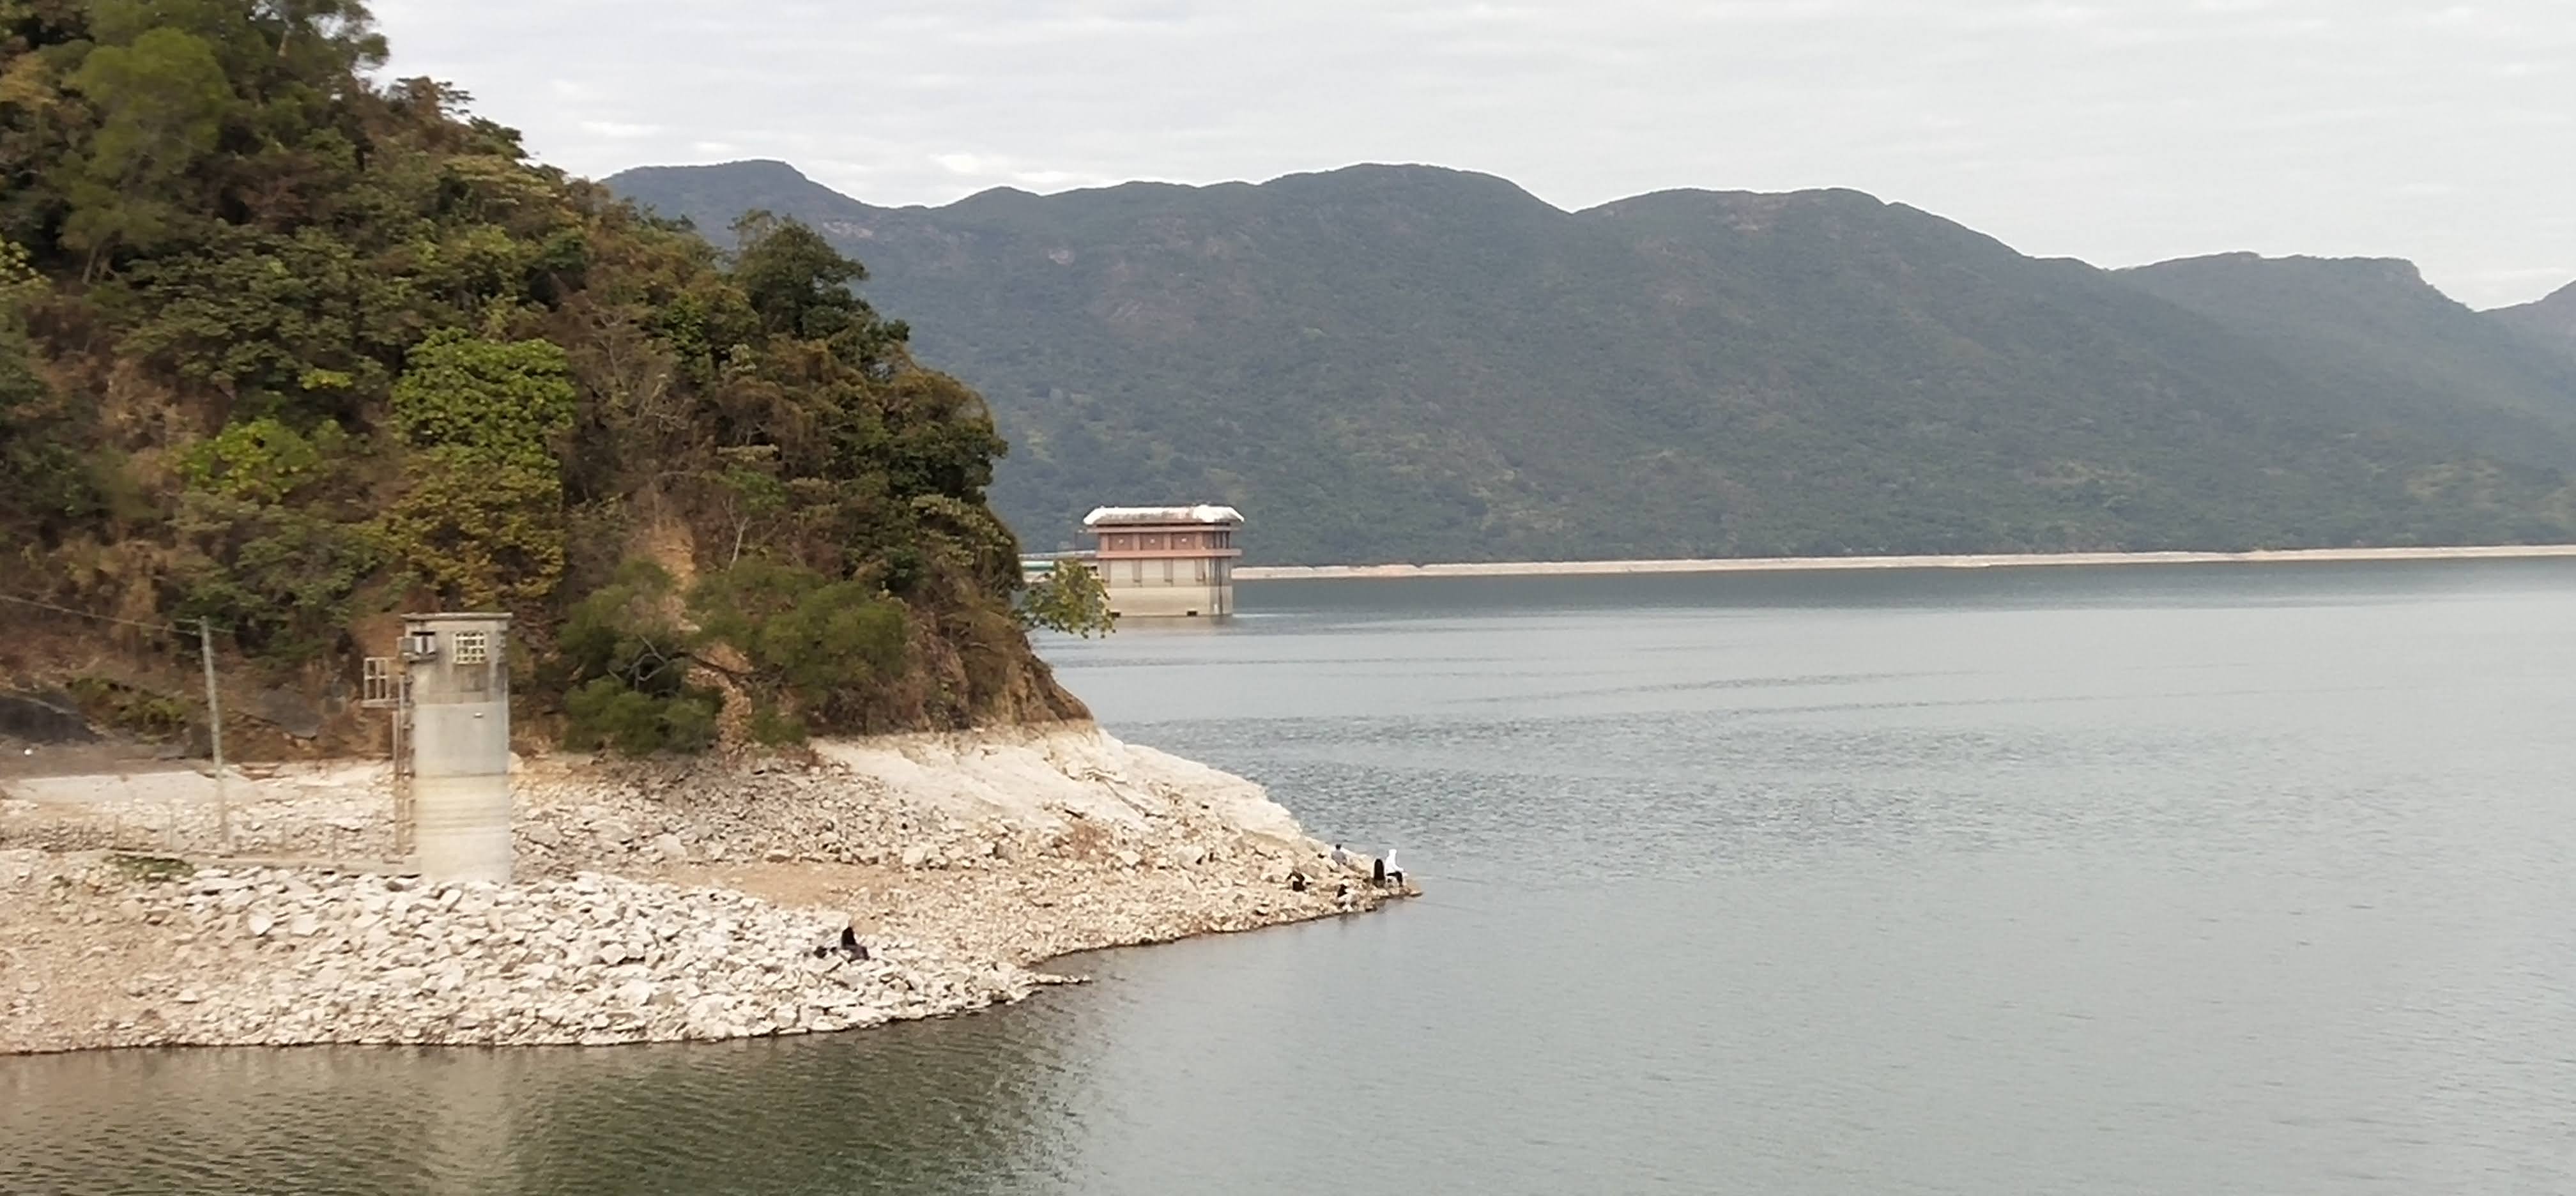 The facilities of Plover Cove Reservoir